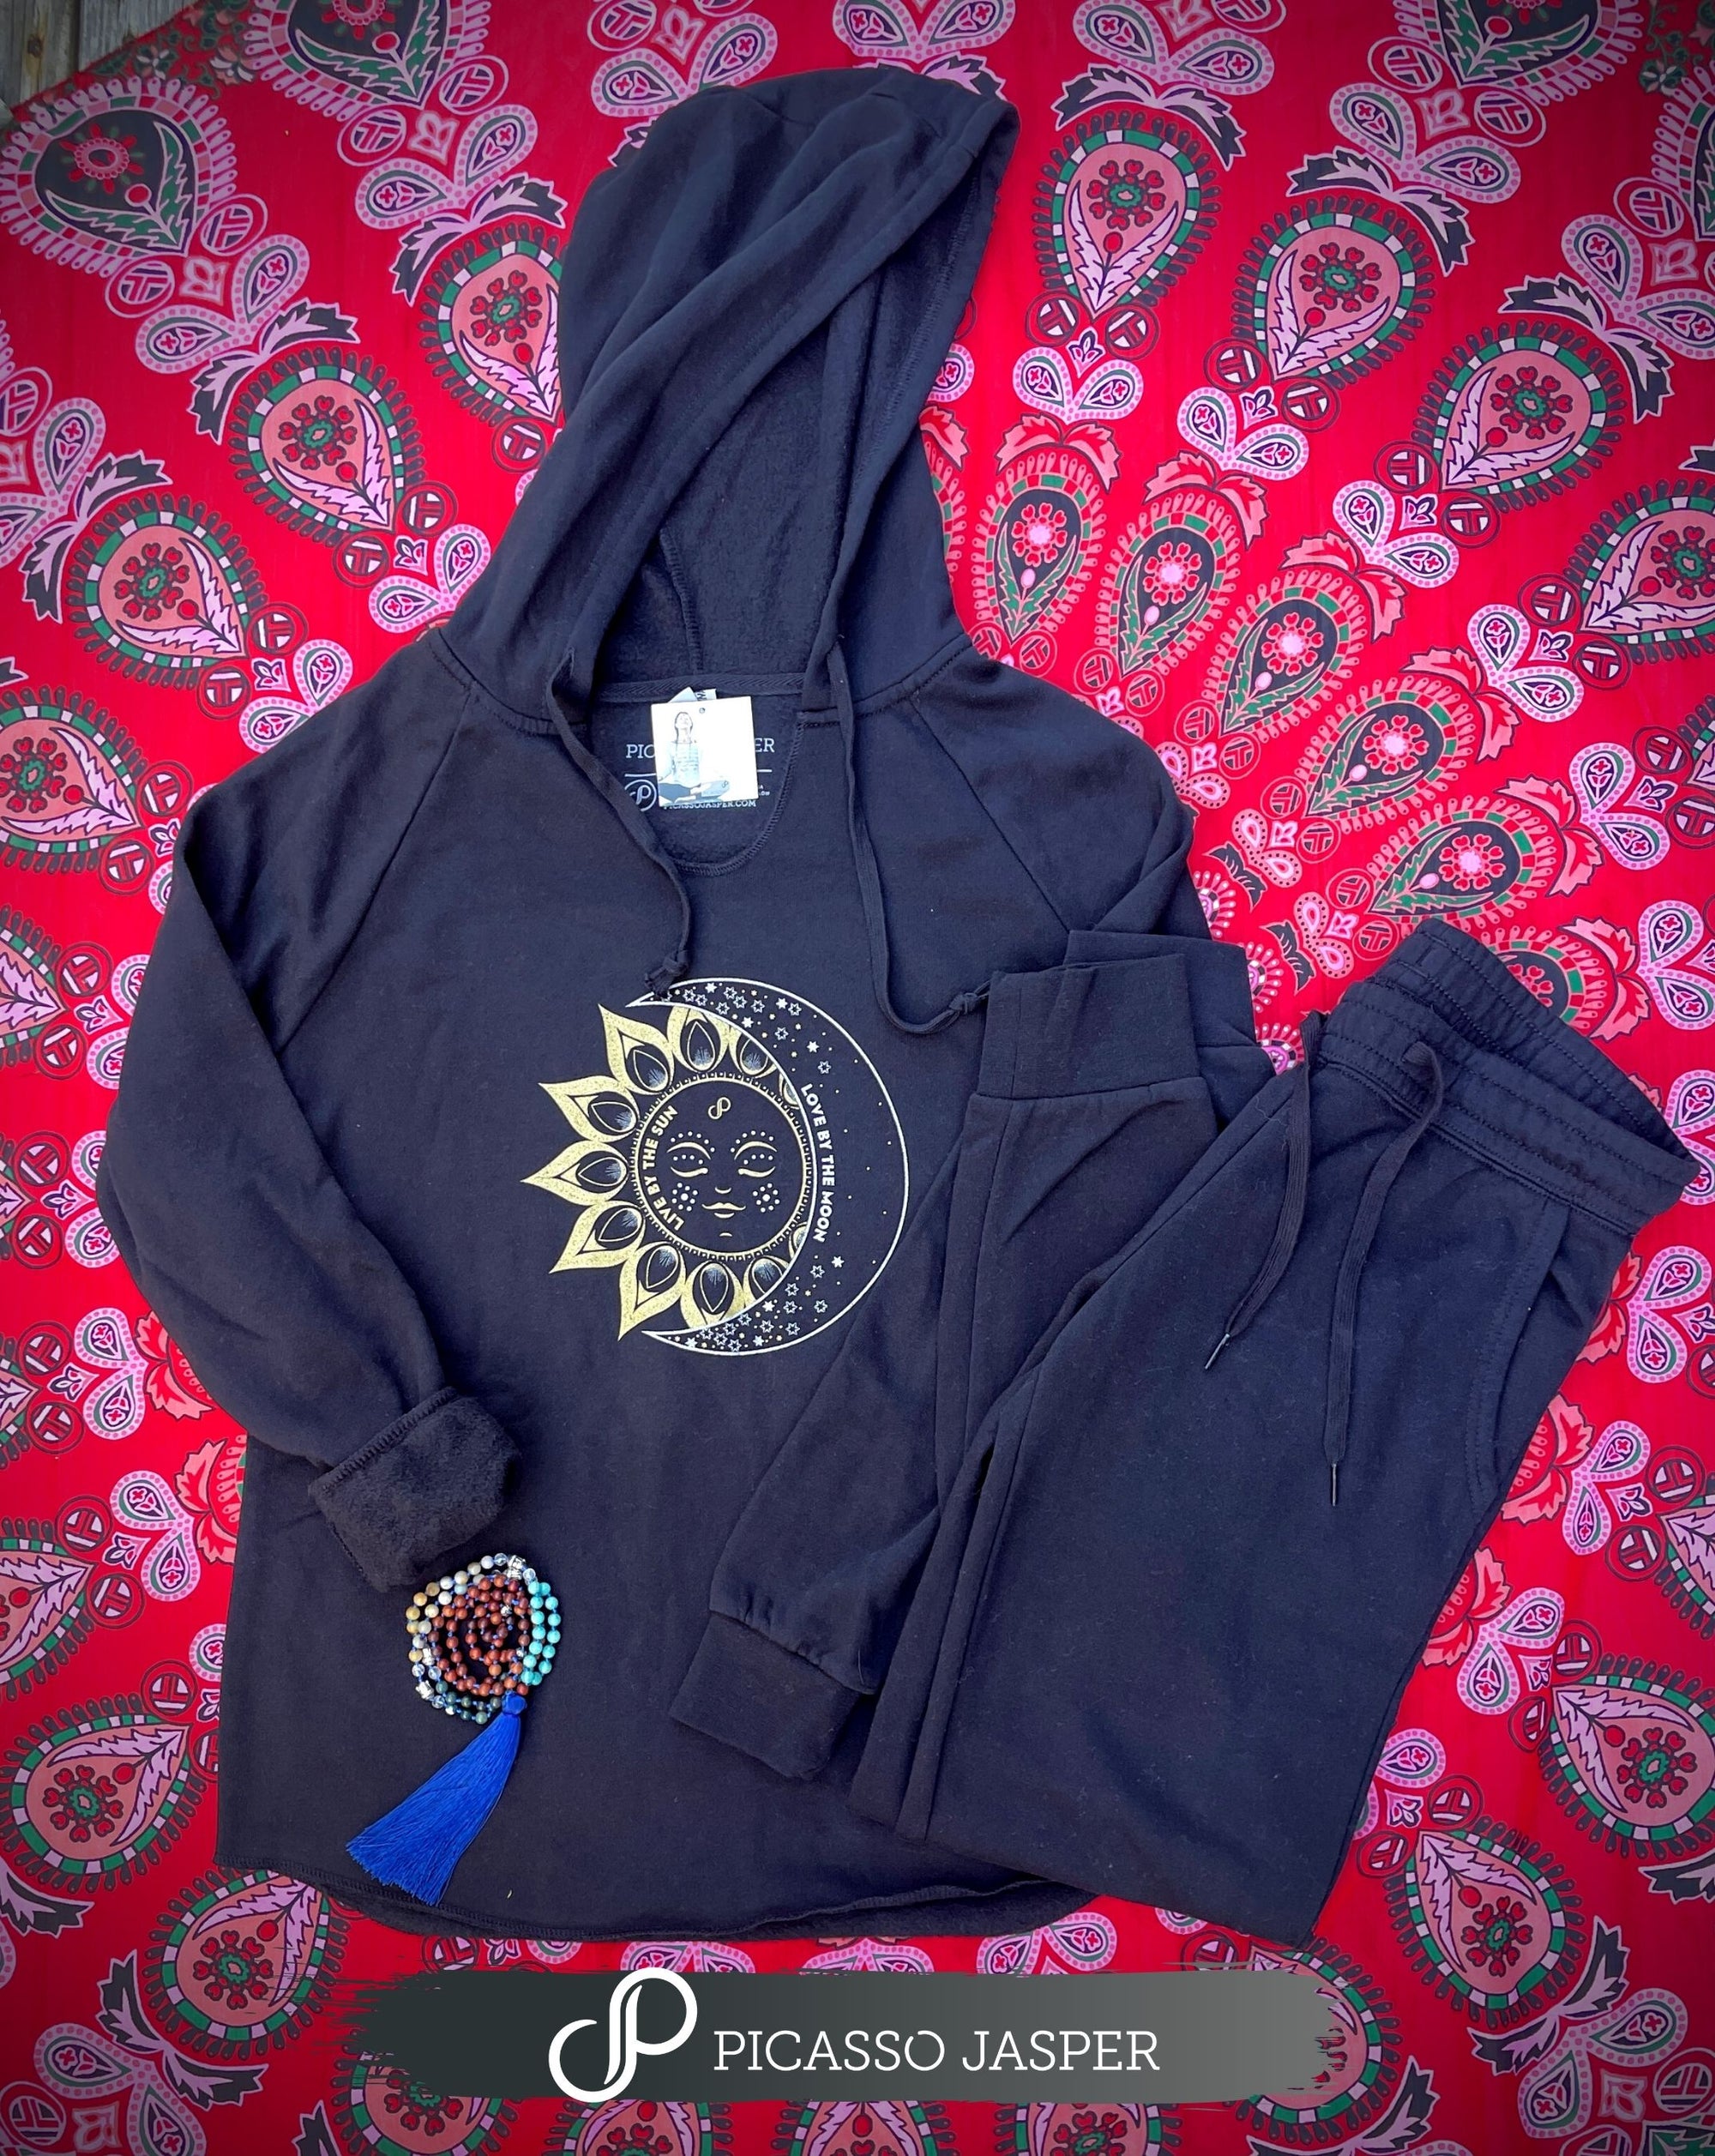 Live by the Sun, Love by the Moon + Jogger +  Crystal, Sweatshirt Bundle!